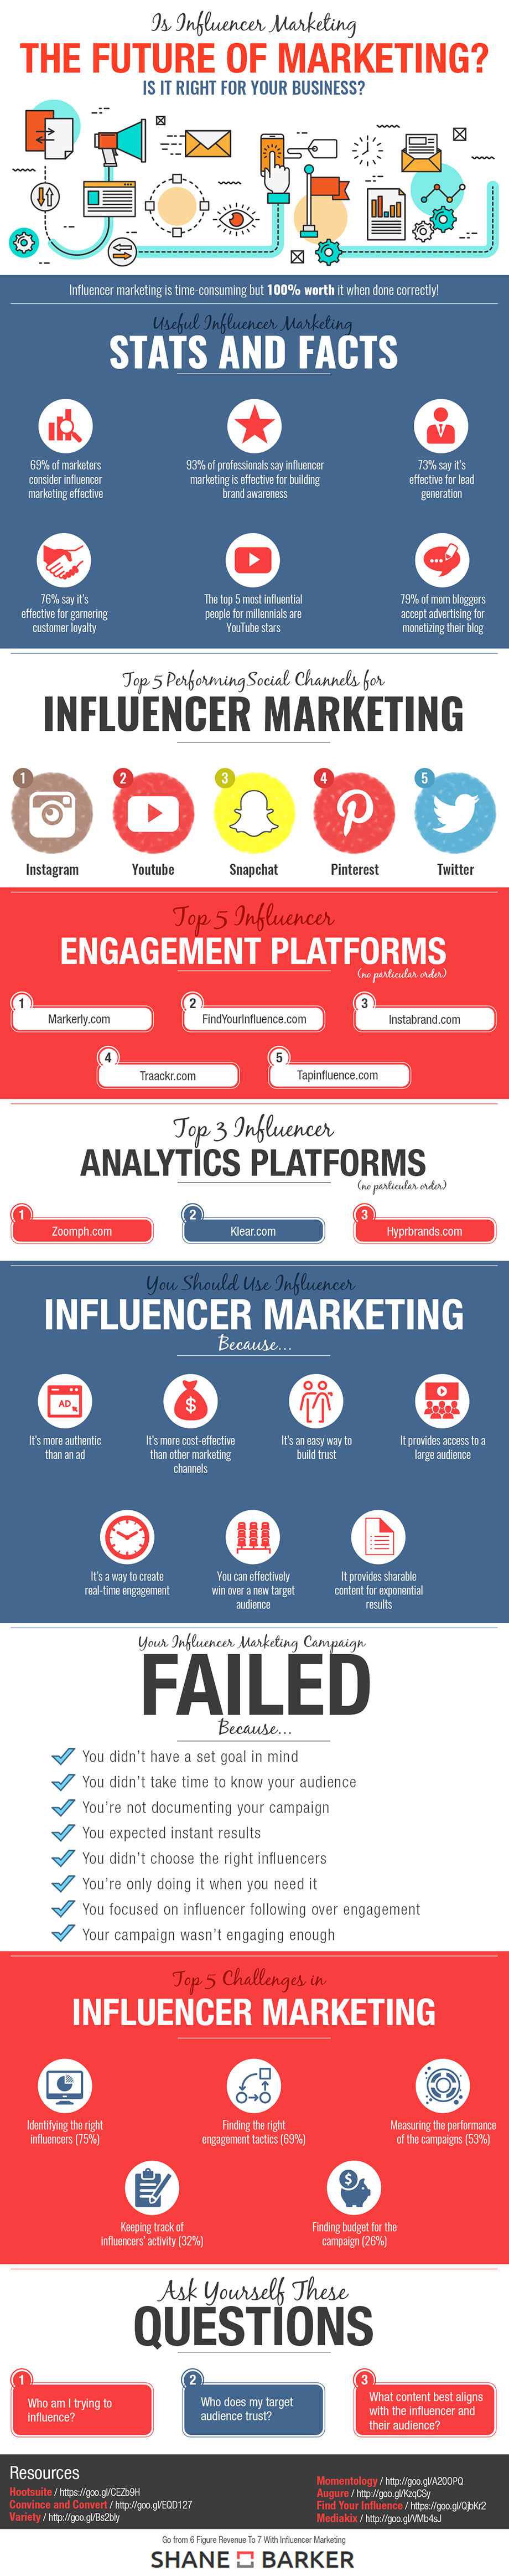 Is Influencer Marketing the Future of Marketing? (Infographic)